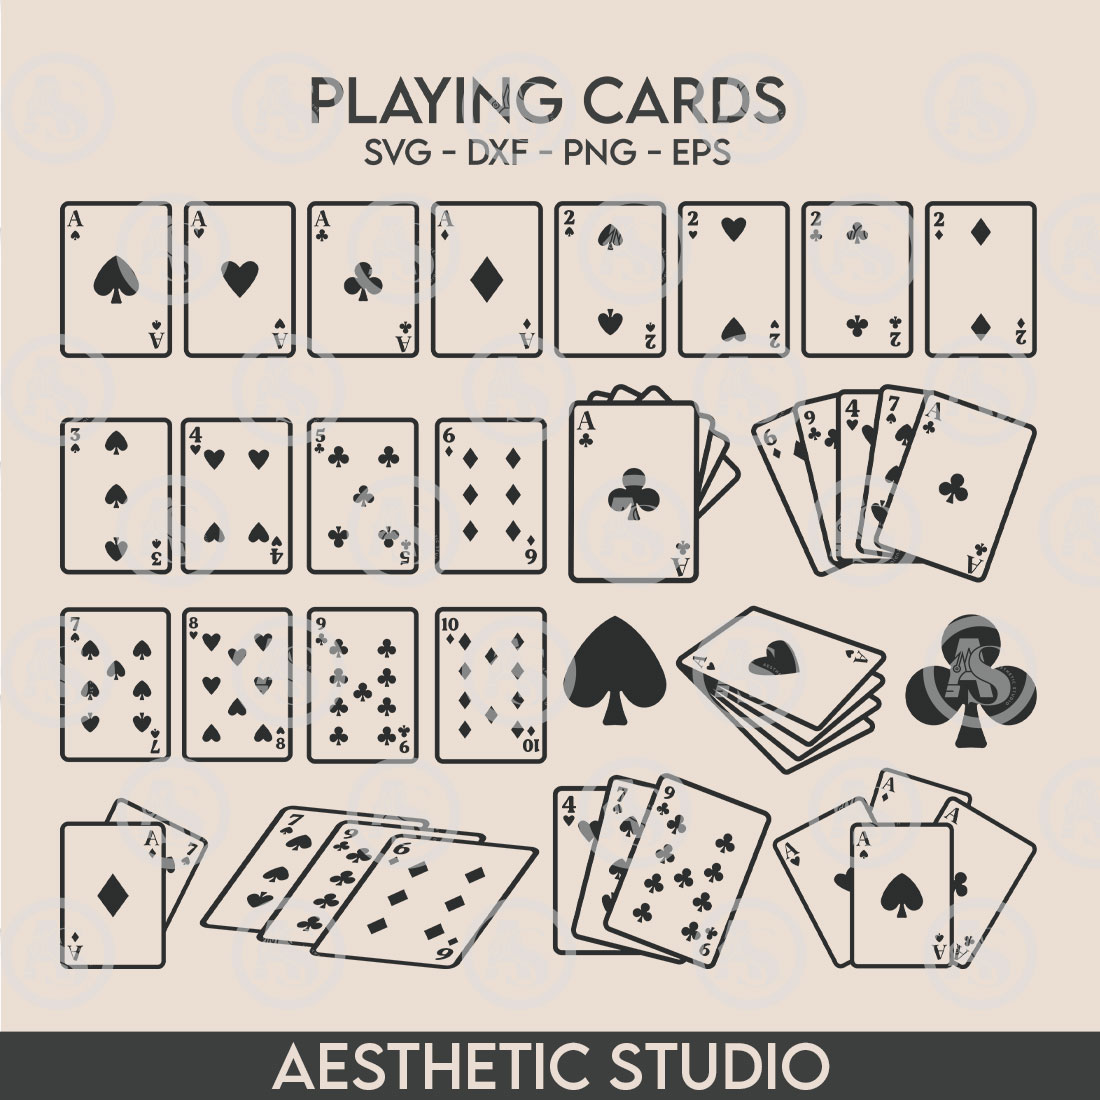 Playing Cards Svg, Cards Outline, Full Deck Playing Cards, Aces Svg, Poker Cards Svg, Royal Flush, Royal Flush Svg, Playing Cards Silhouette, Hearts Svg, Spades Svg, Clubs, Diamonds, Vector, Clipart cover image.